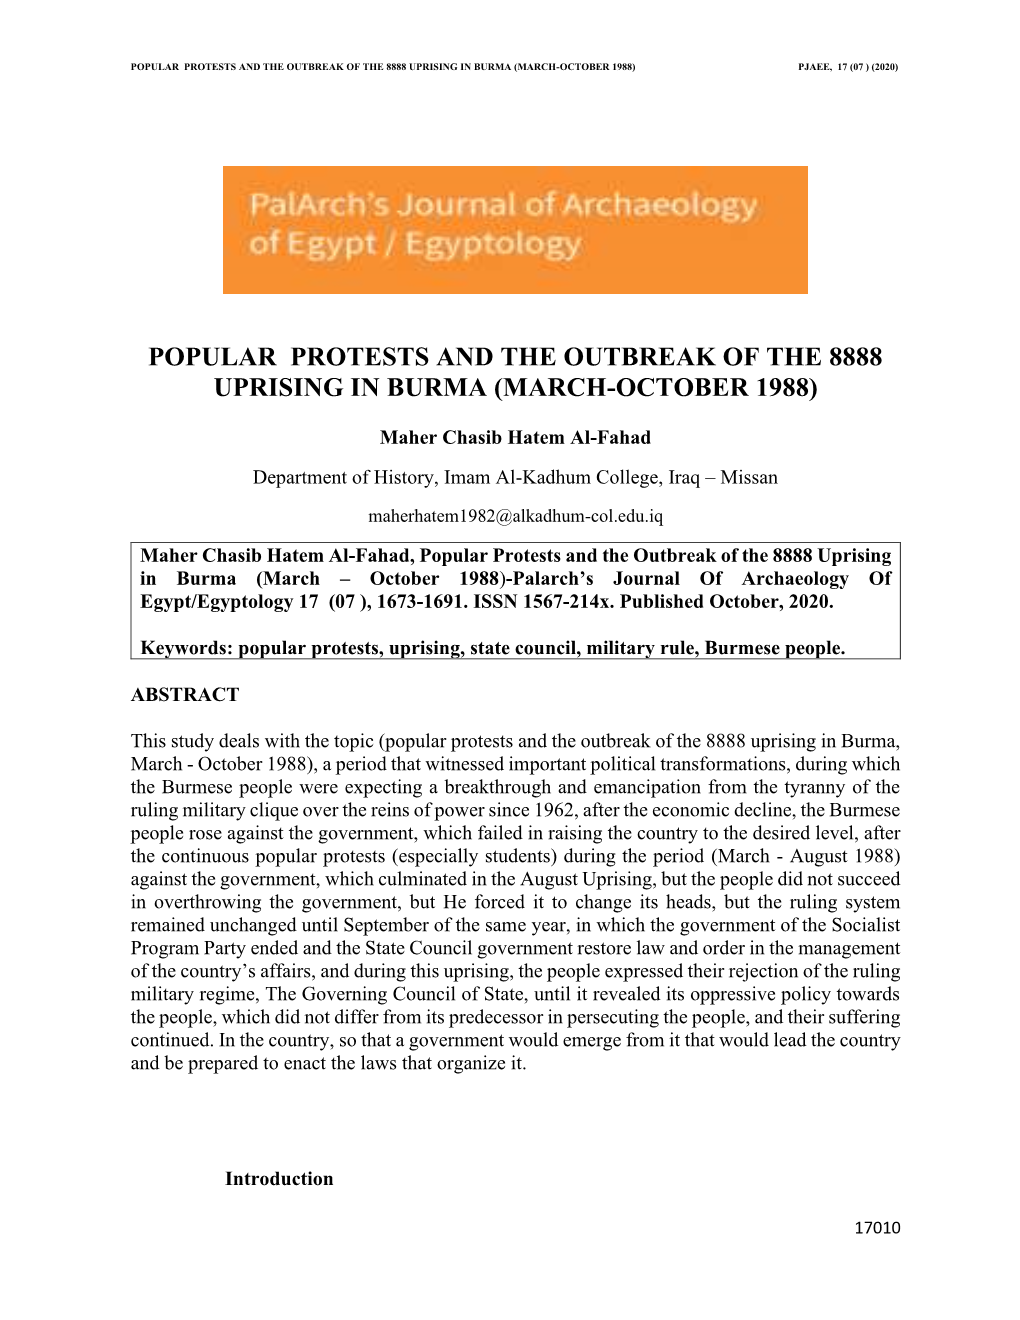 Popular Protests and the Outbreak of the 8888 Uprising in Burma (March-October 1988) Pjaee, 17 (07 ) (2020)